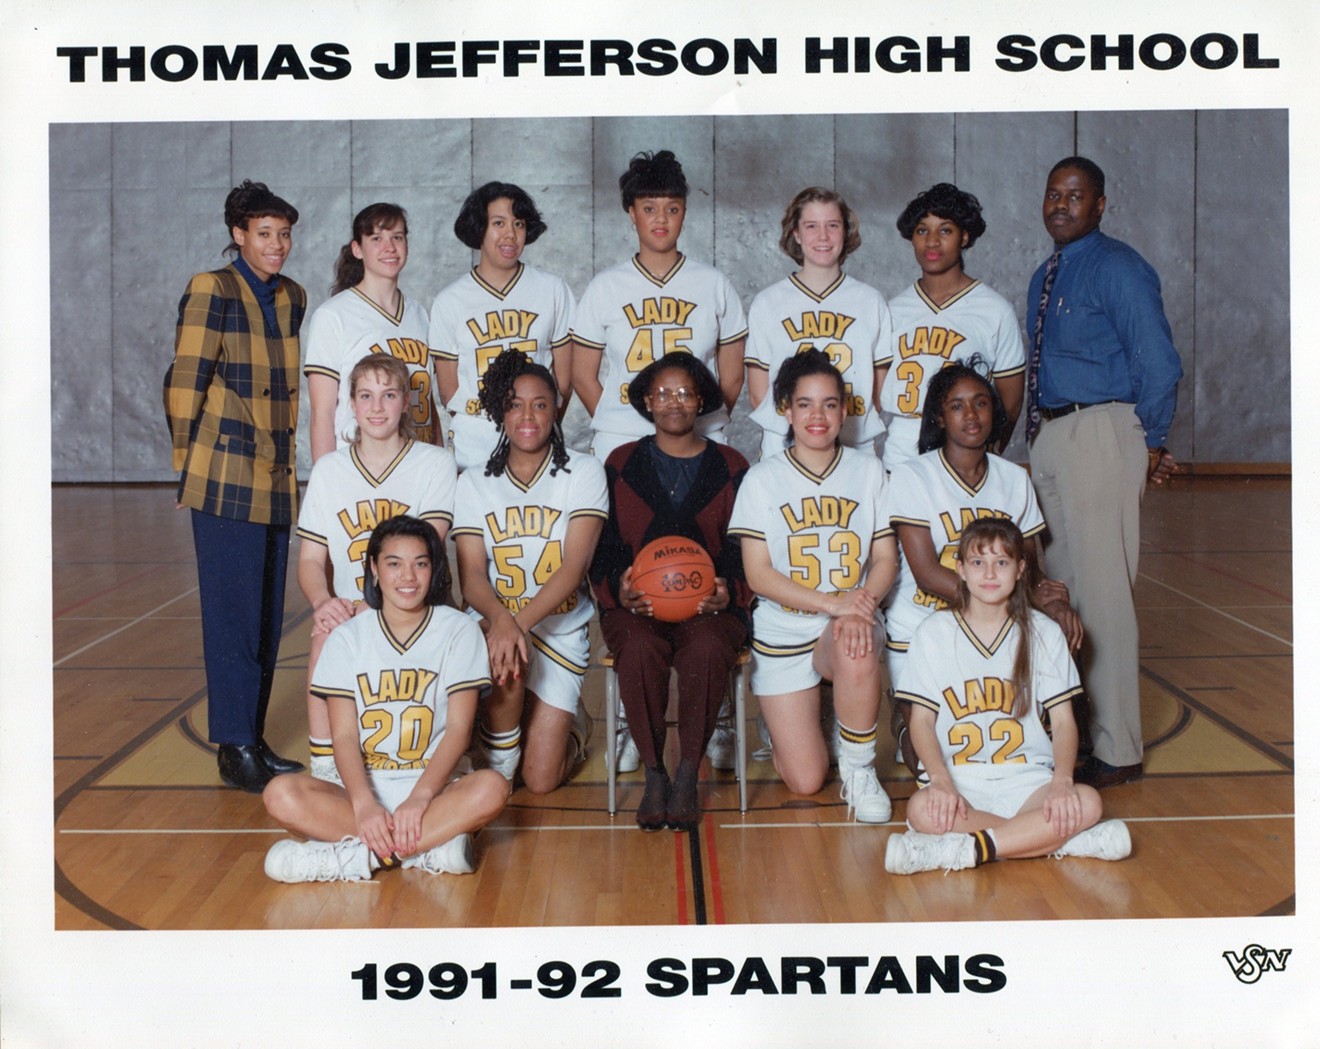 Kathryn Kindle-Hughes (center) coached many Thomas Jefferson teams over the years.